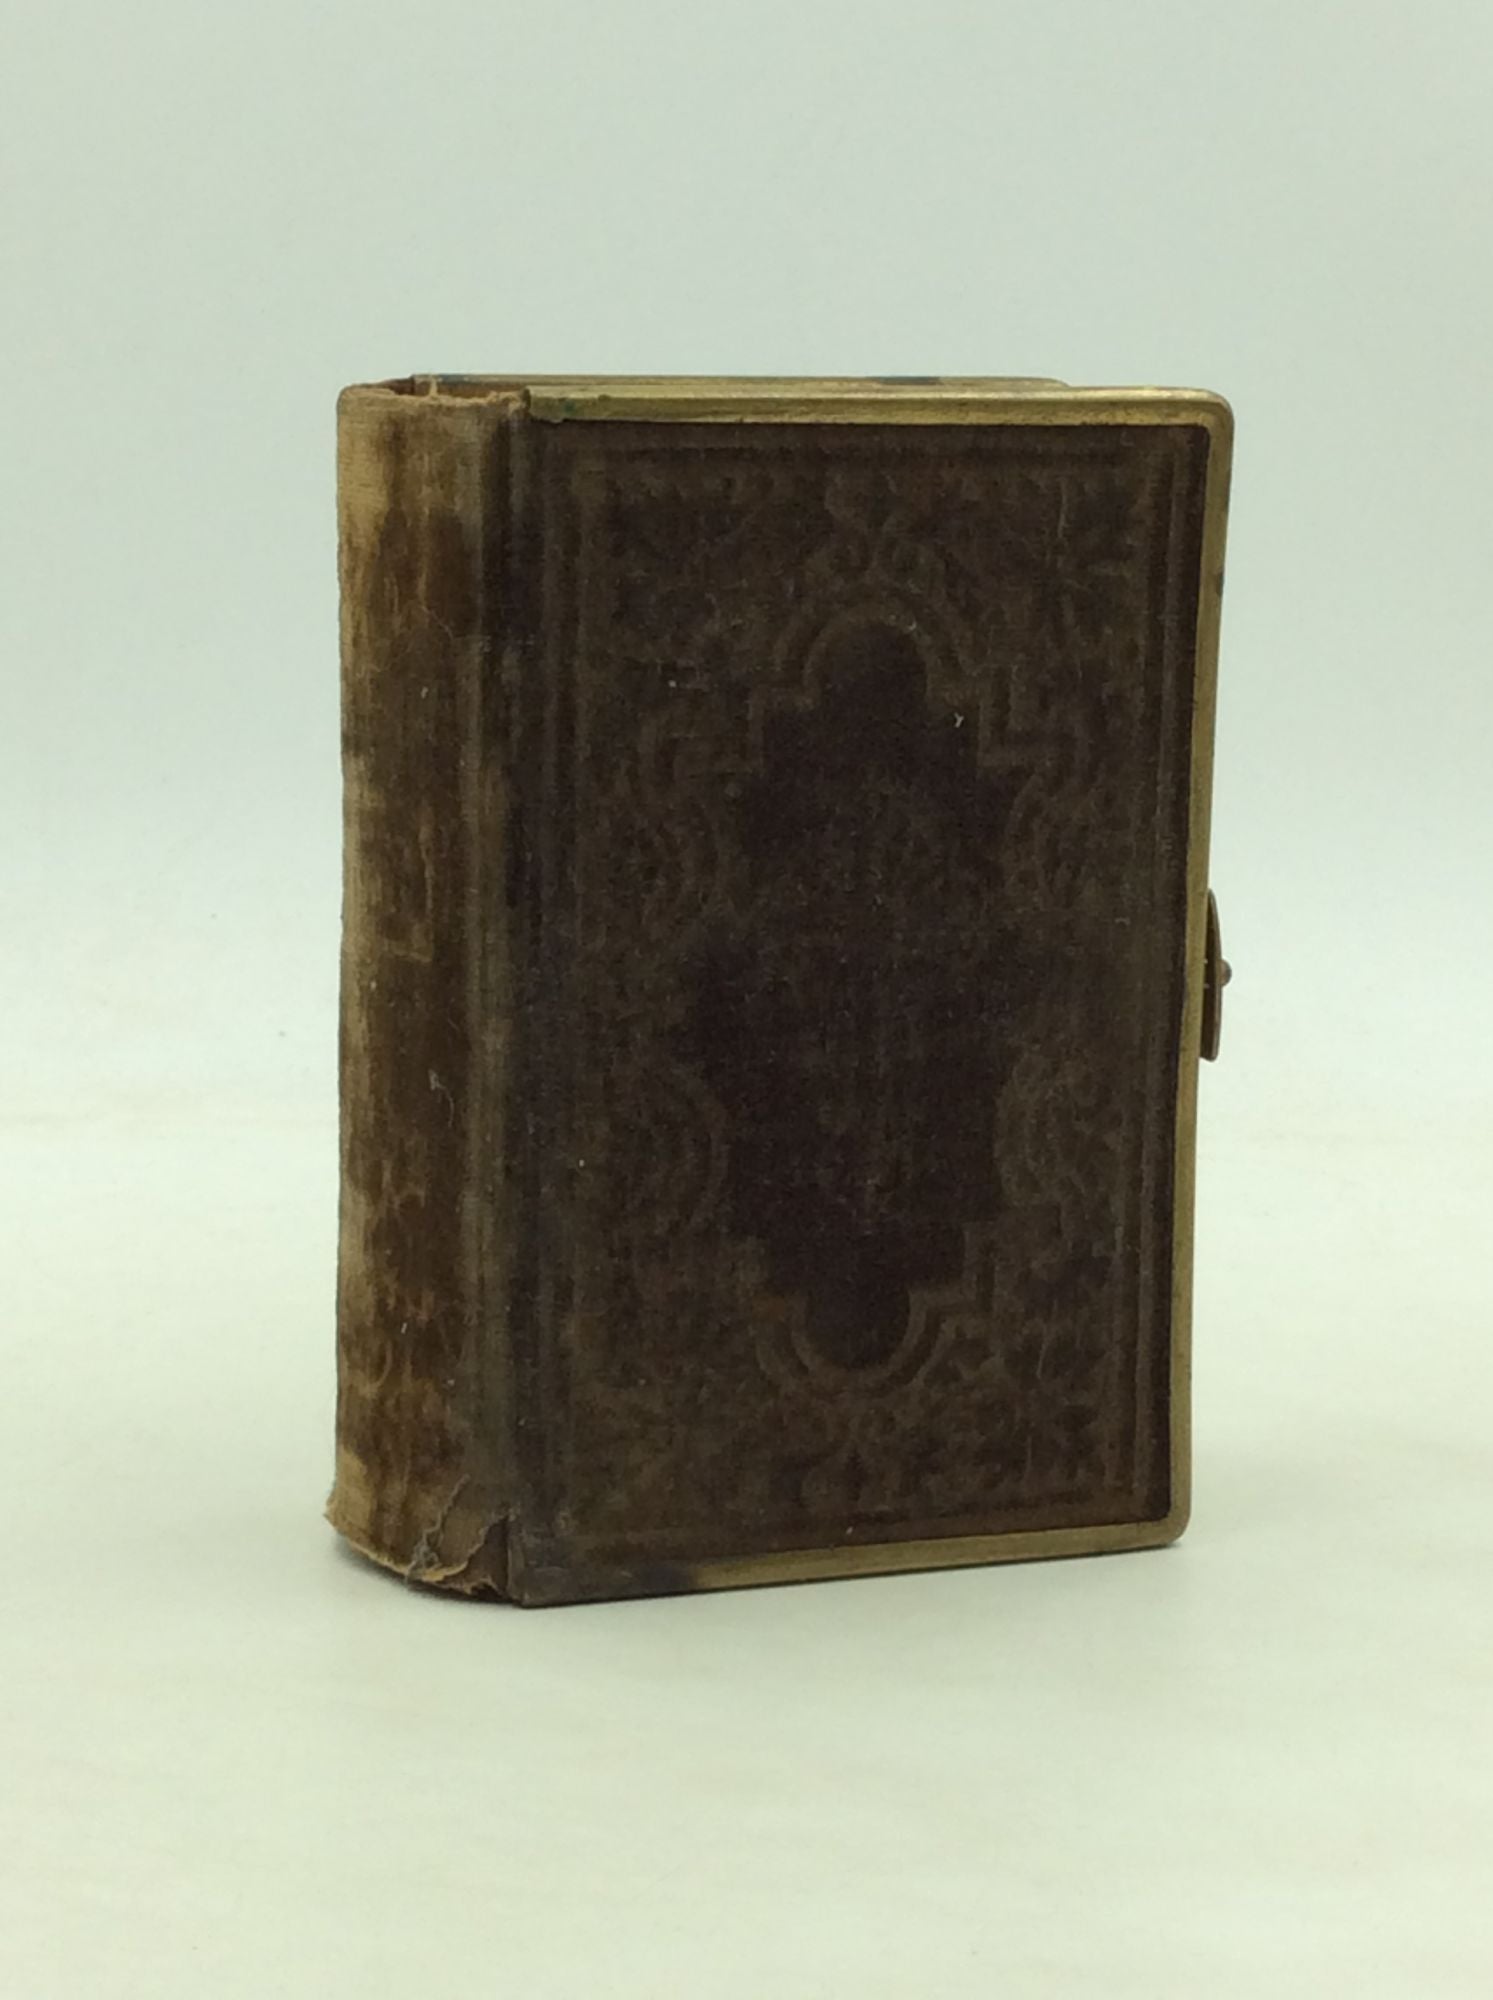  - The Little Ursuline Manual, or a Collection of Prayers and Spiritual Exercises, Originally Arranged for the Young Ladies Educated at the Ursuline Convent, Cork